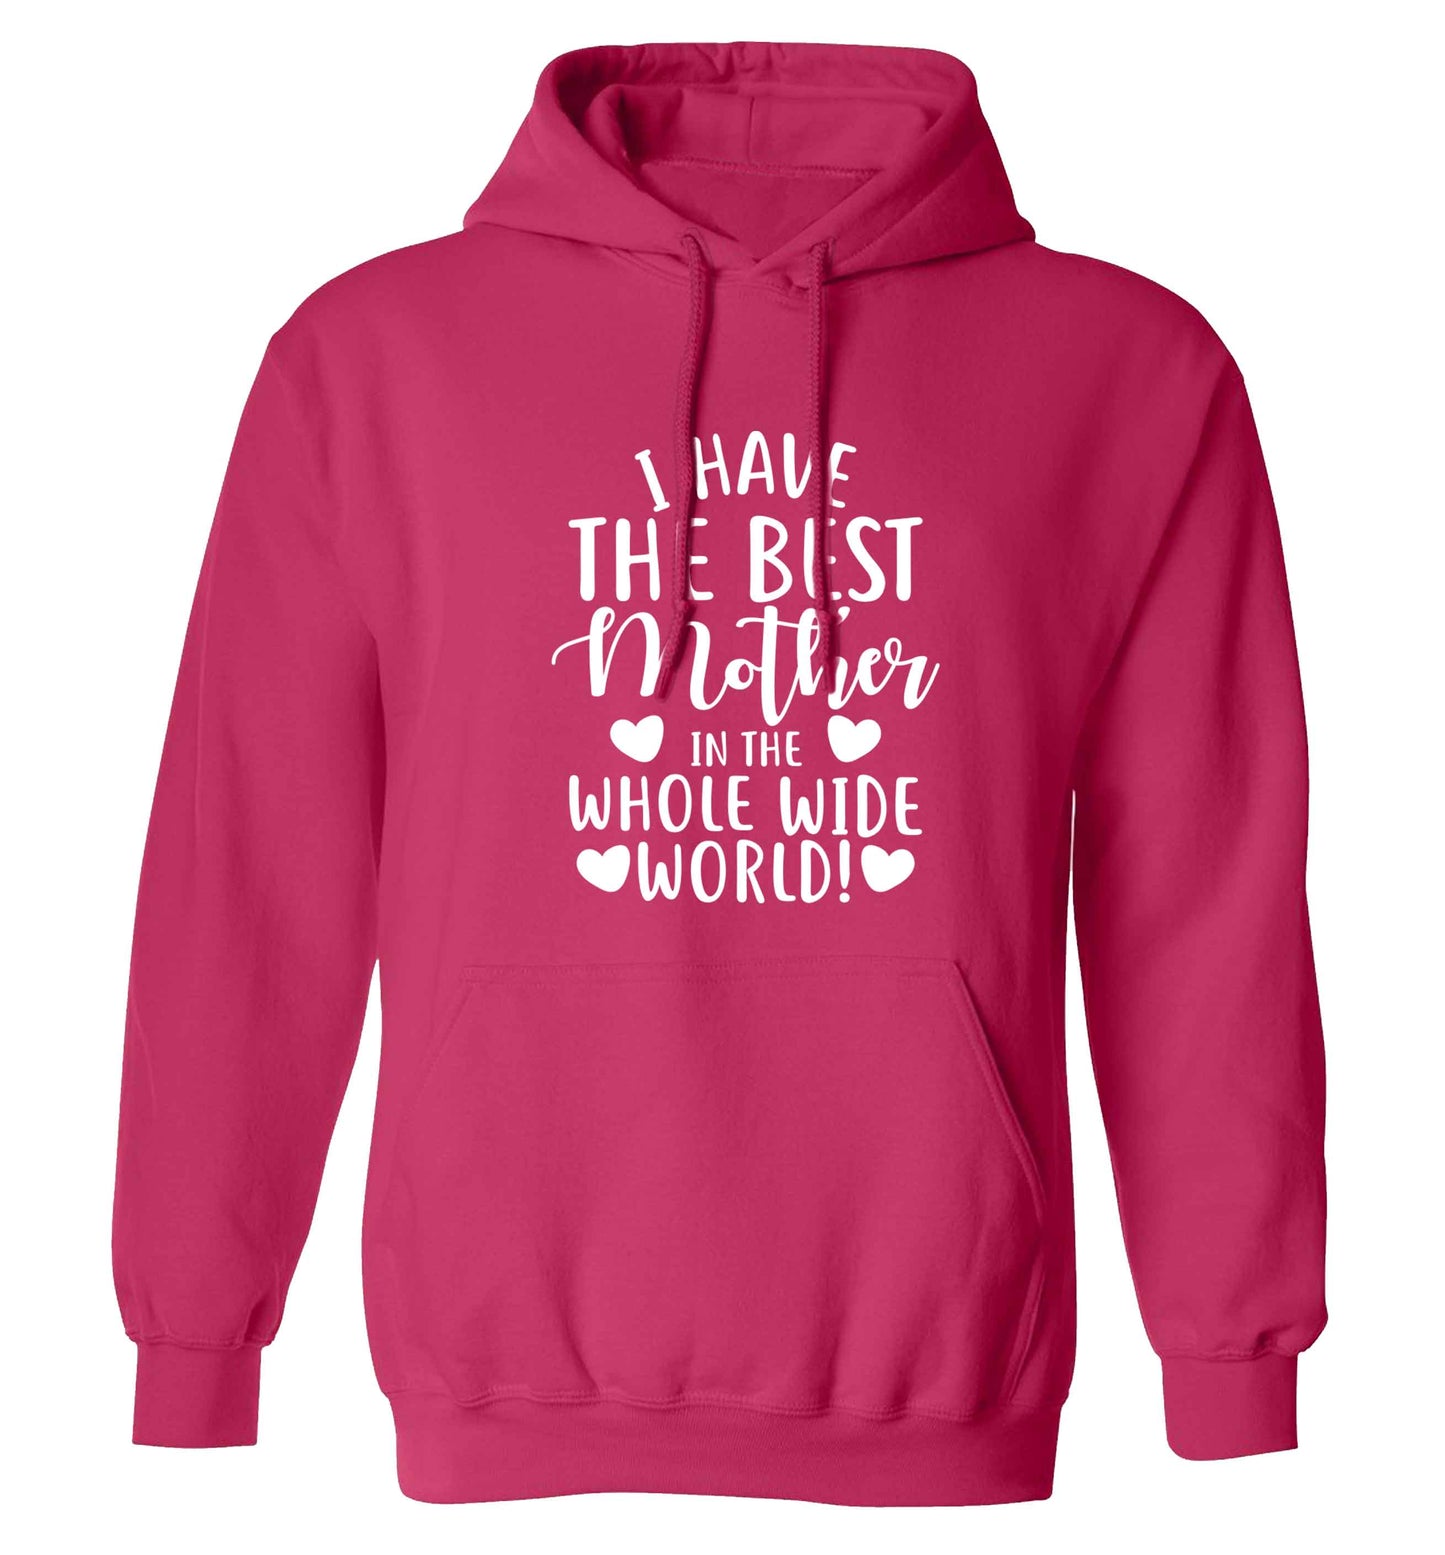 I have the best mother in the whole wide world adults unisex pink hoodie 2XL